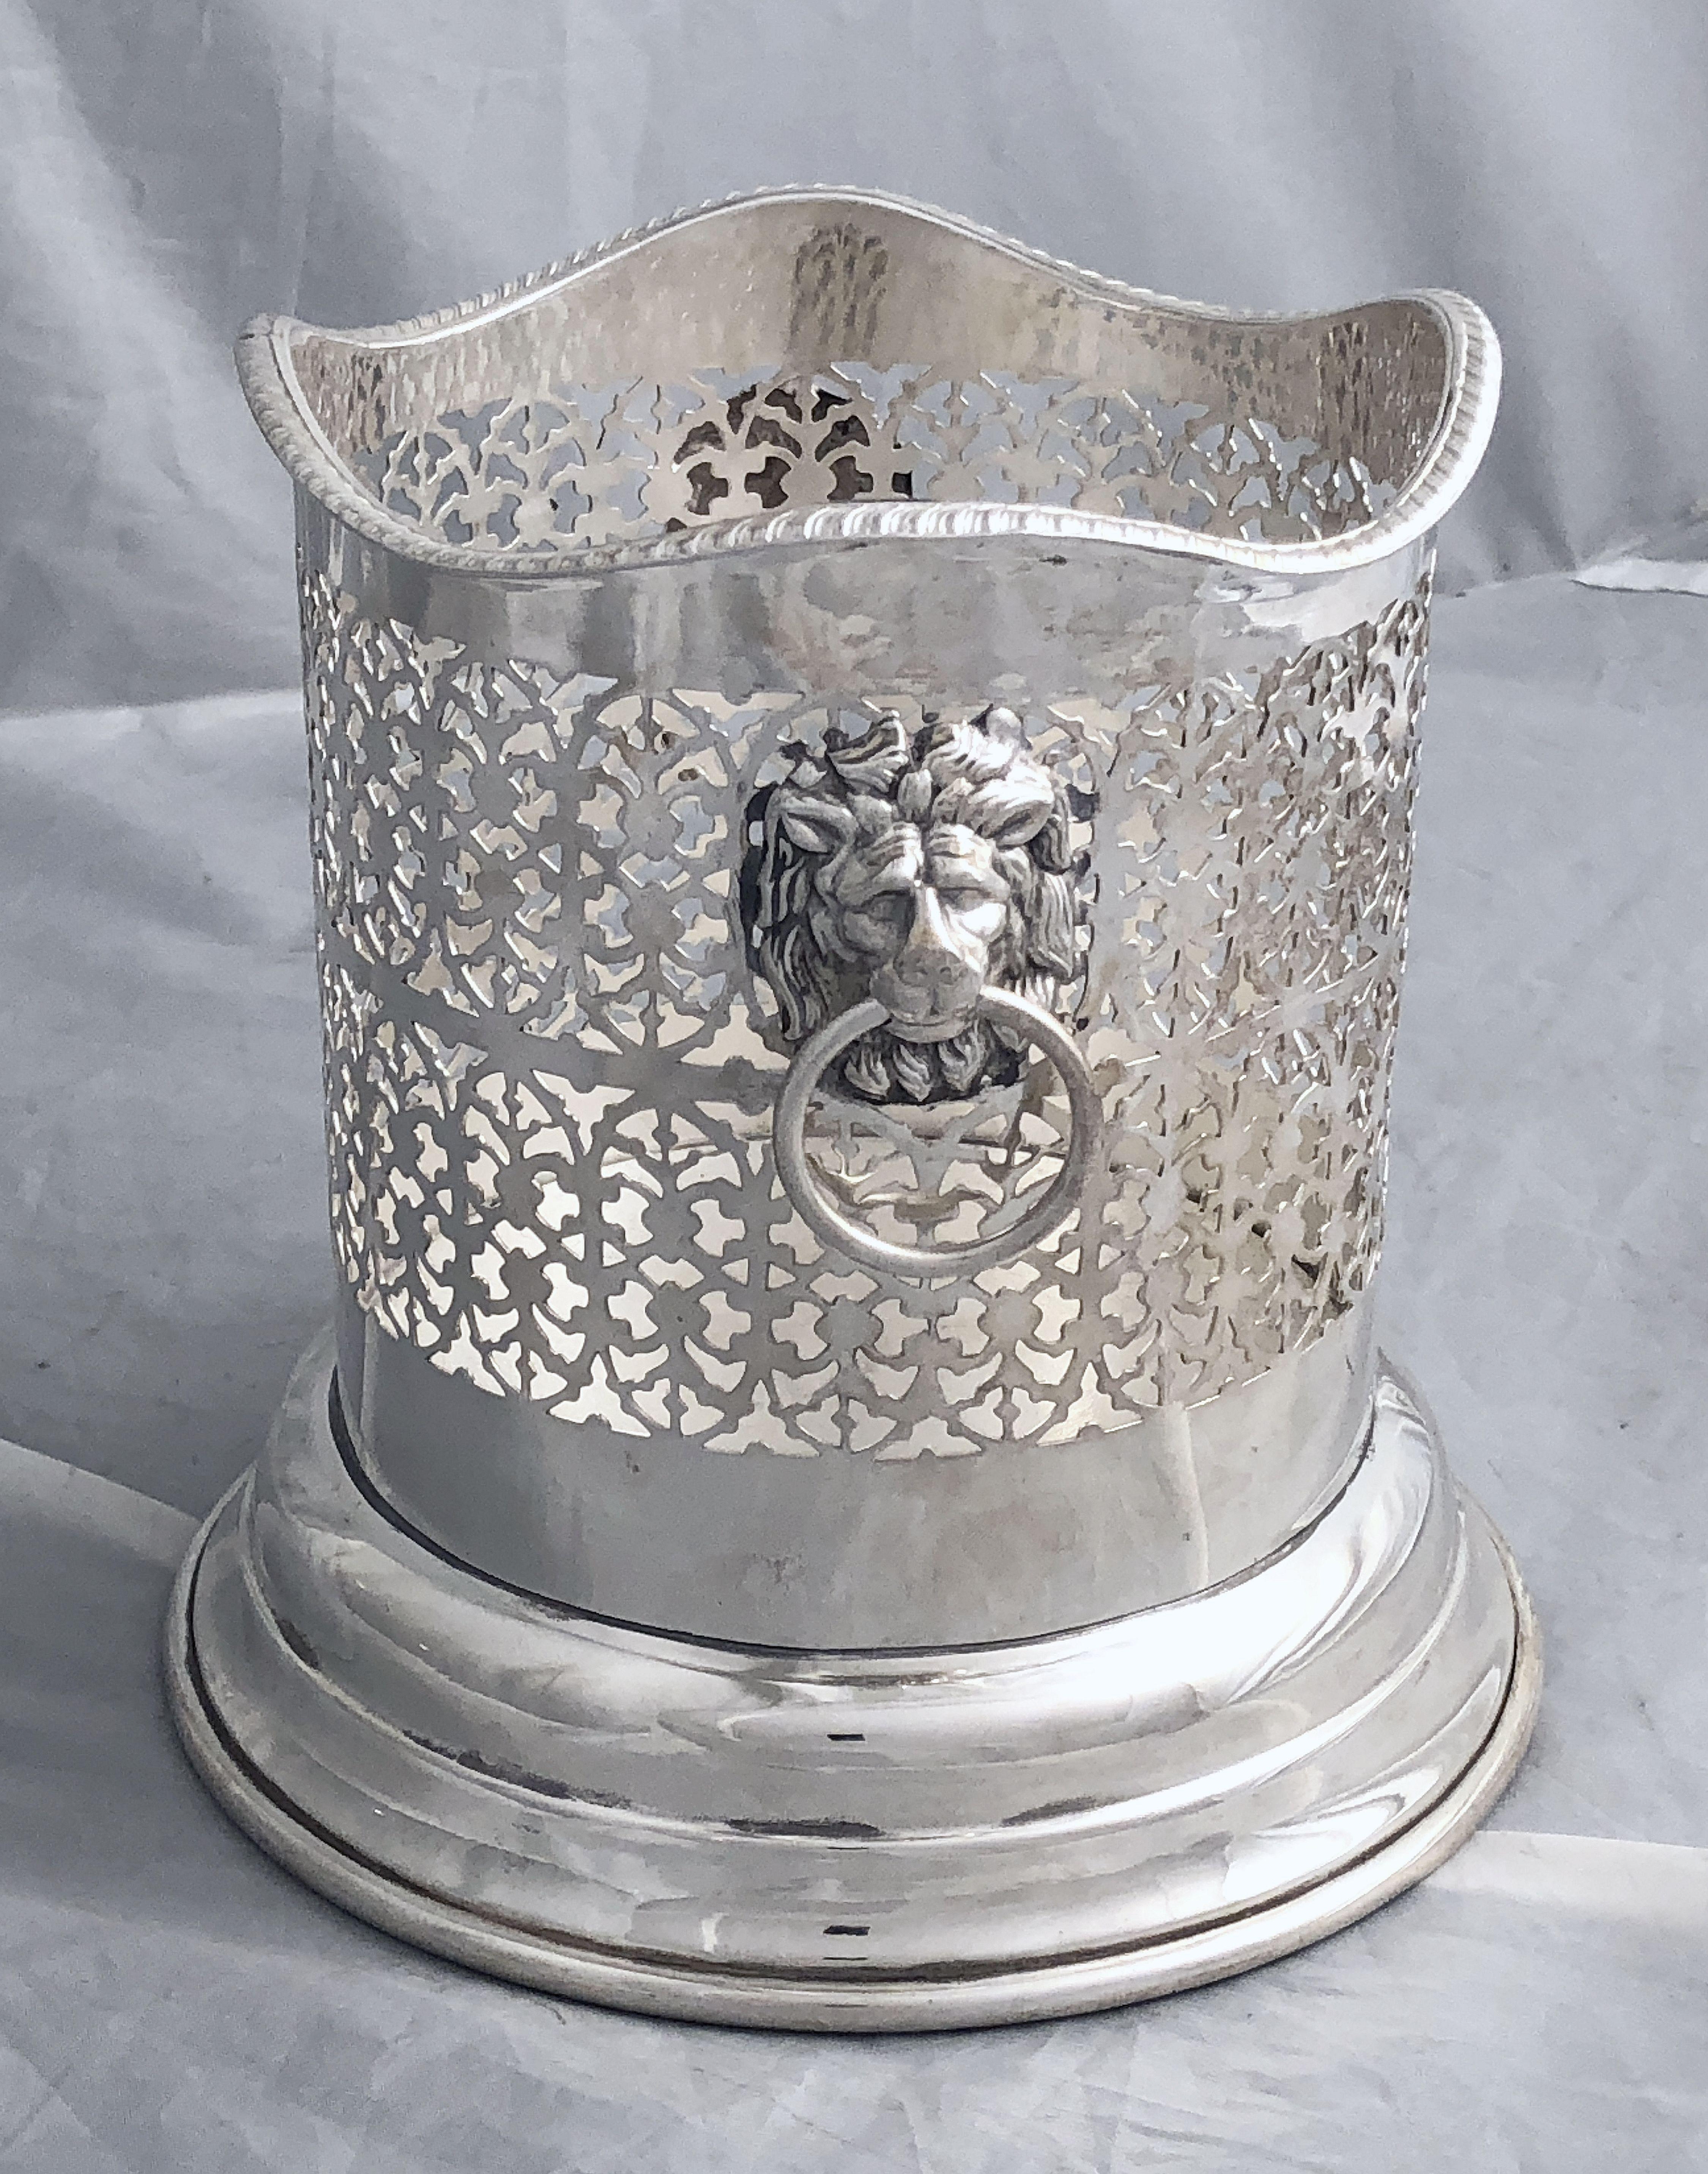 A handsome English wine bottle display holder or coaster of fine plate silver, featuring a pierced design around the circumference and opposing Regency lion ring pull handles, with serpentine edge around the top.

Designed to add a fine level of